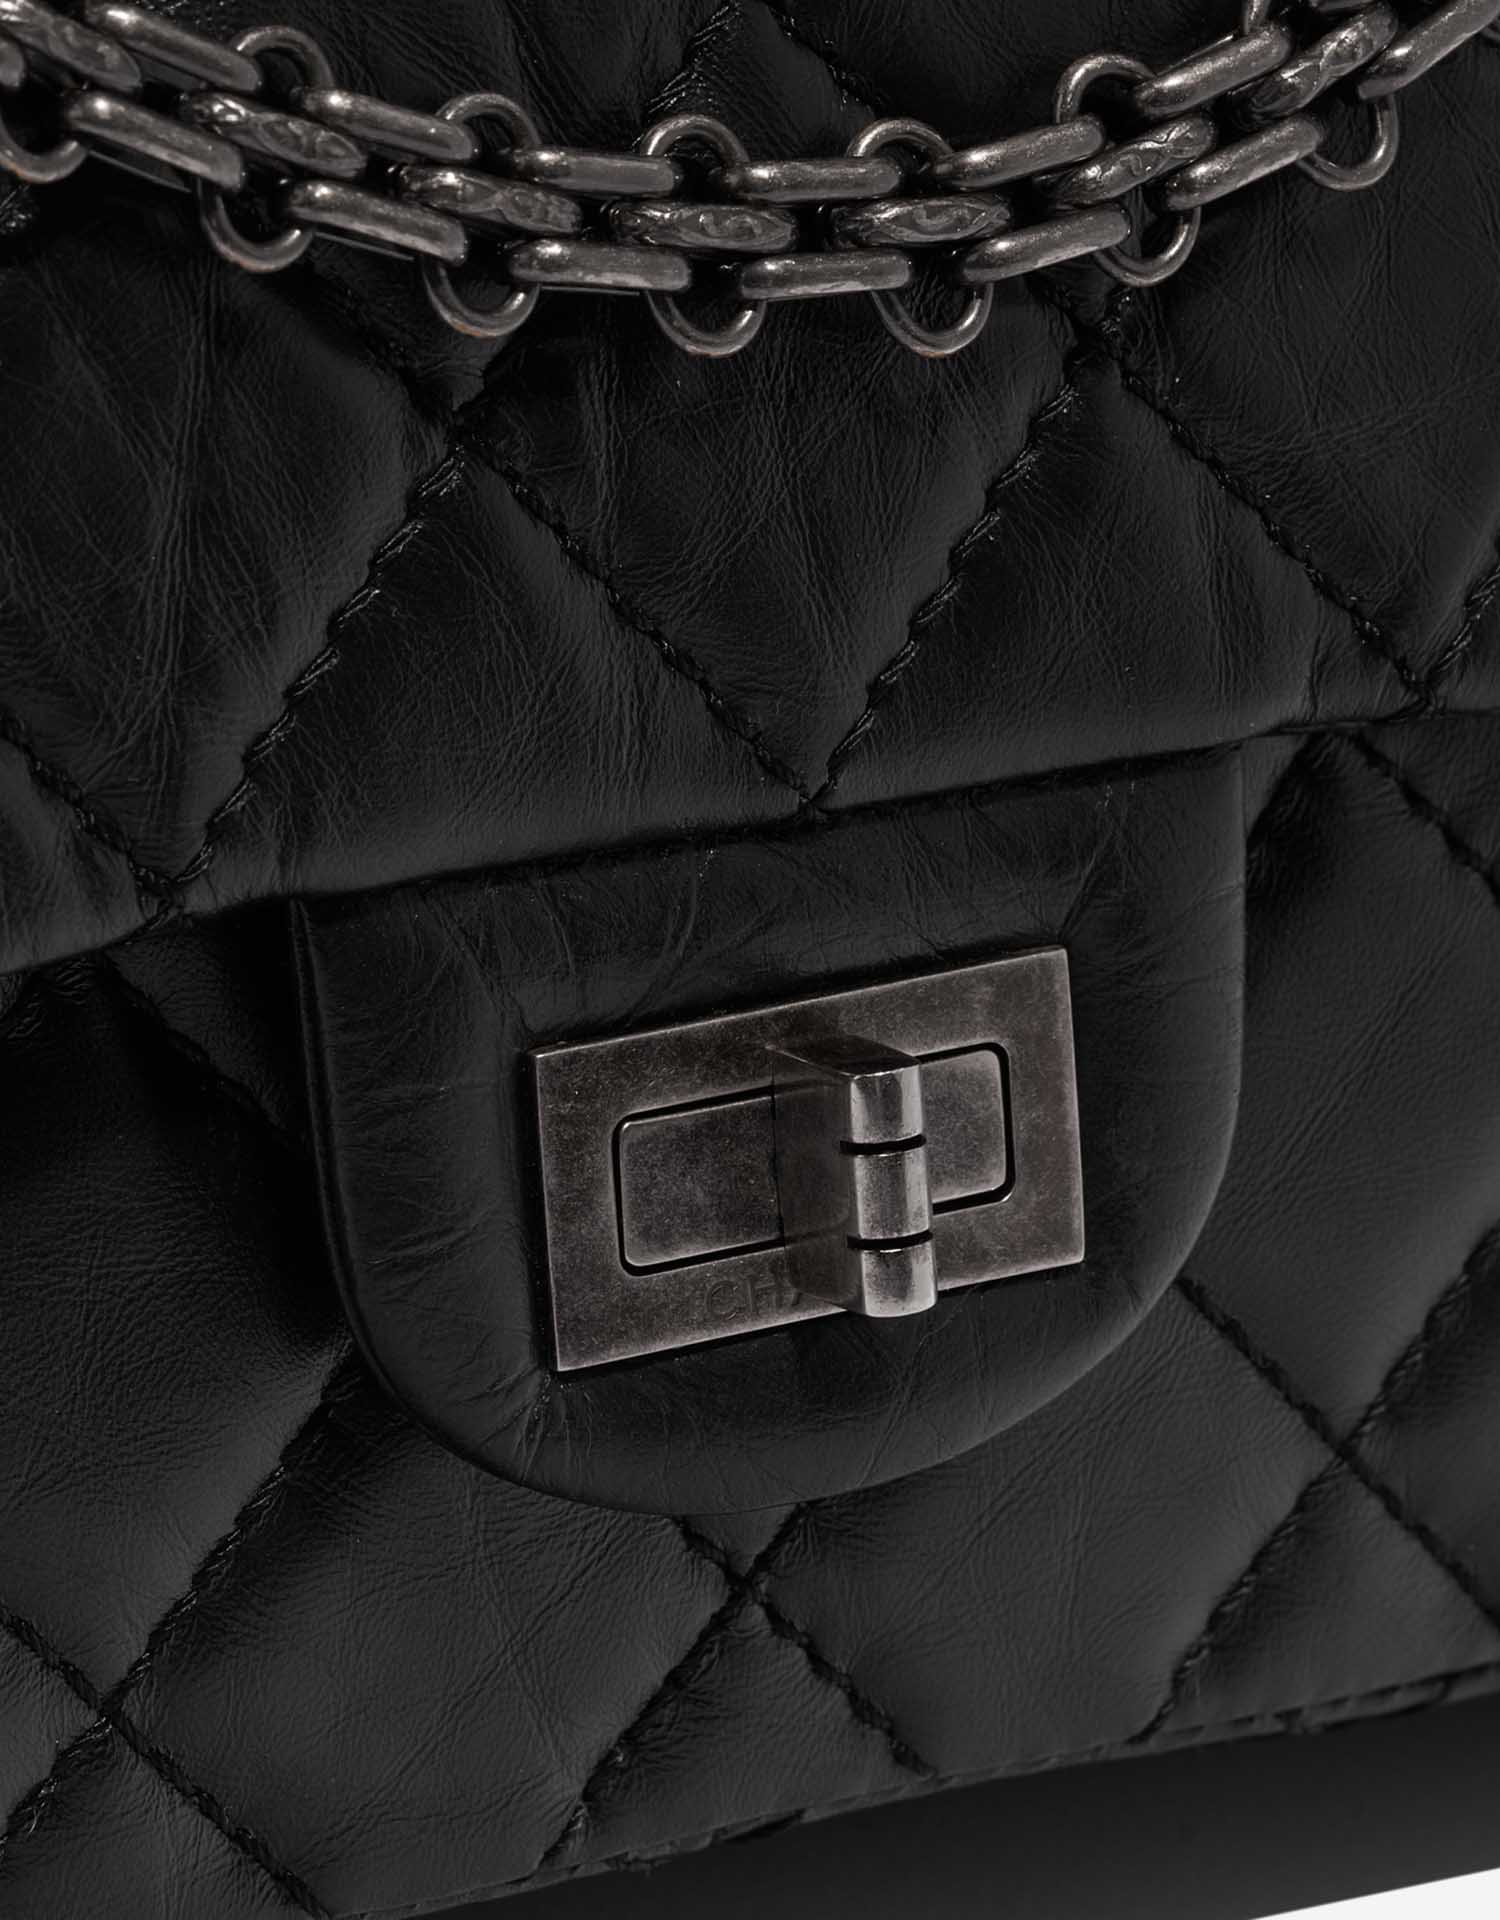 CHANEL Caviar Quilted 2.55 Reissue 226 Flap Black 1293721